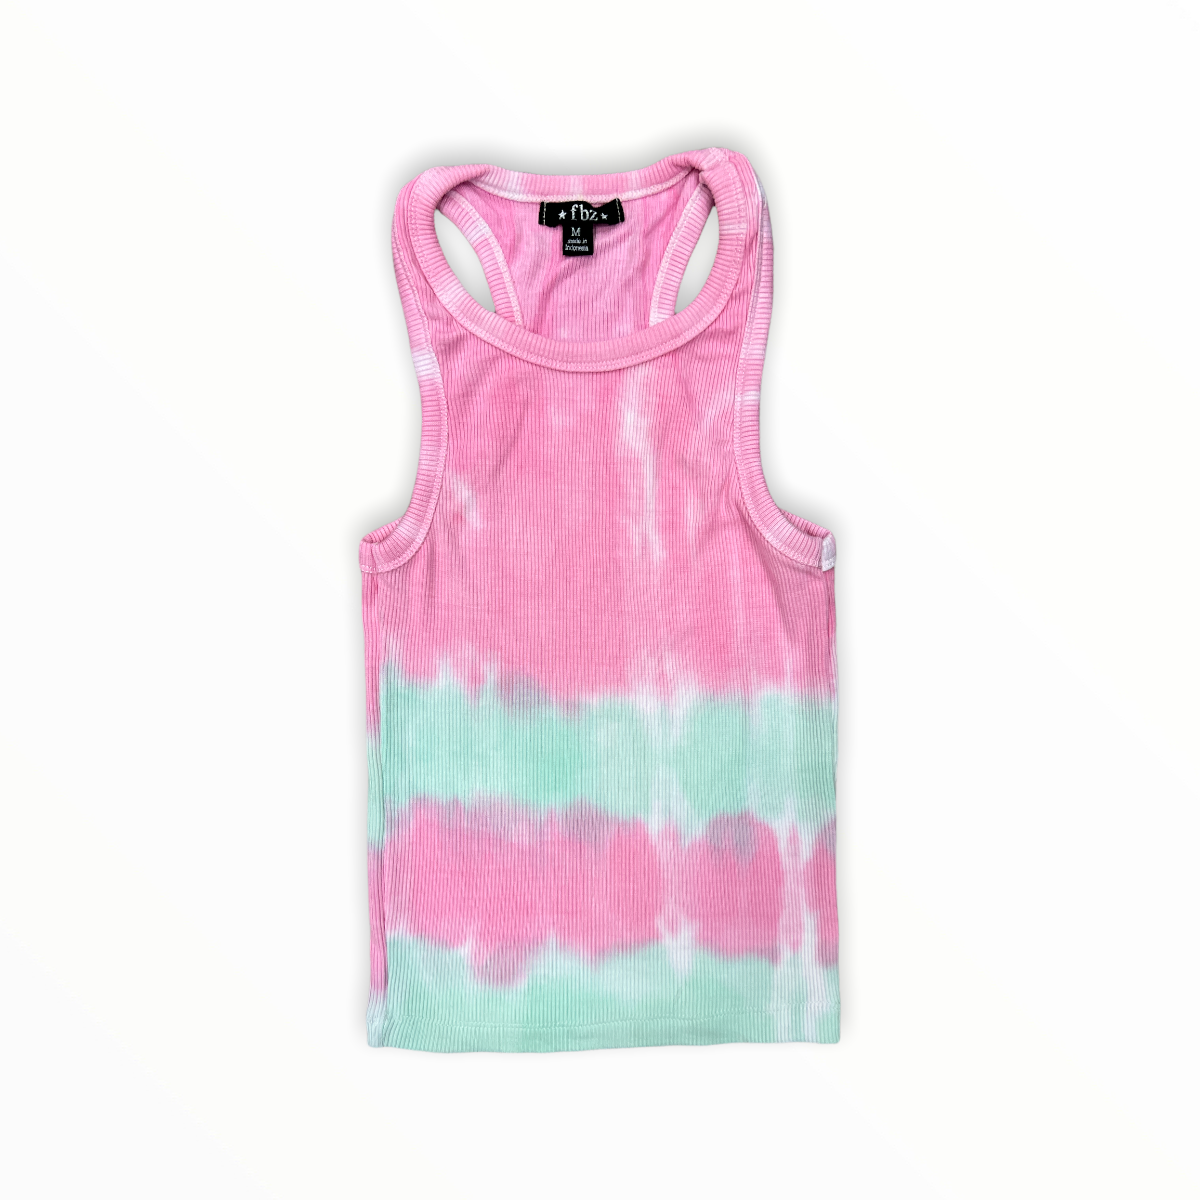 FLOWERS BY ZOE RIBBED TANK - PINK & MINT DIP